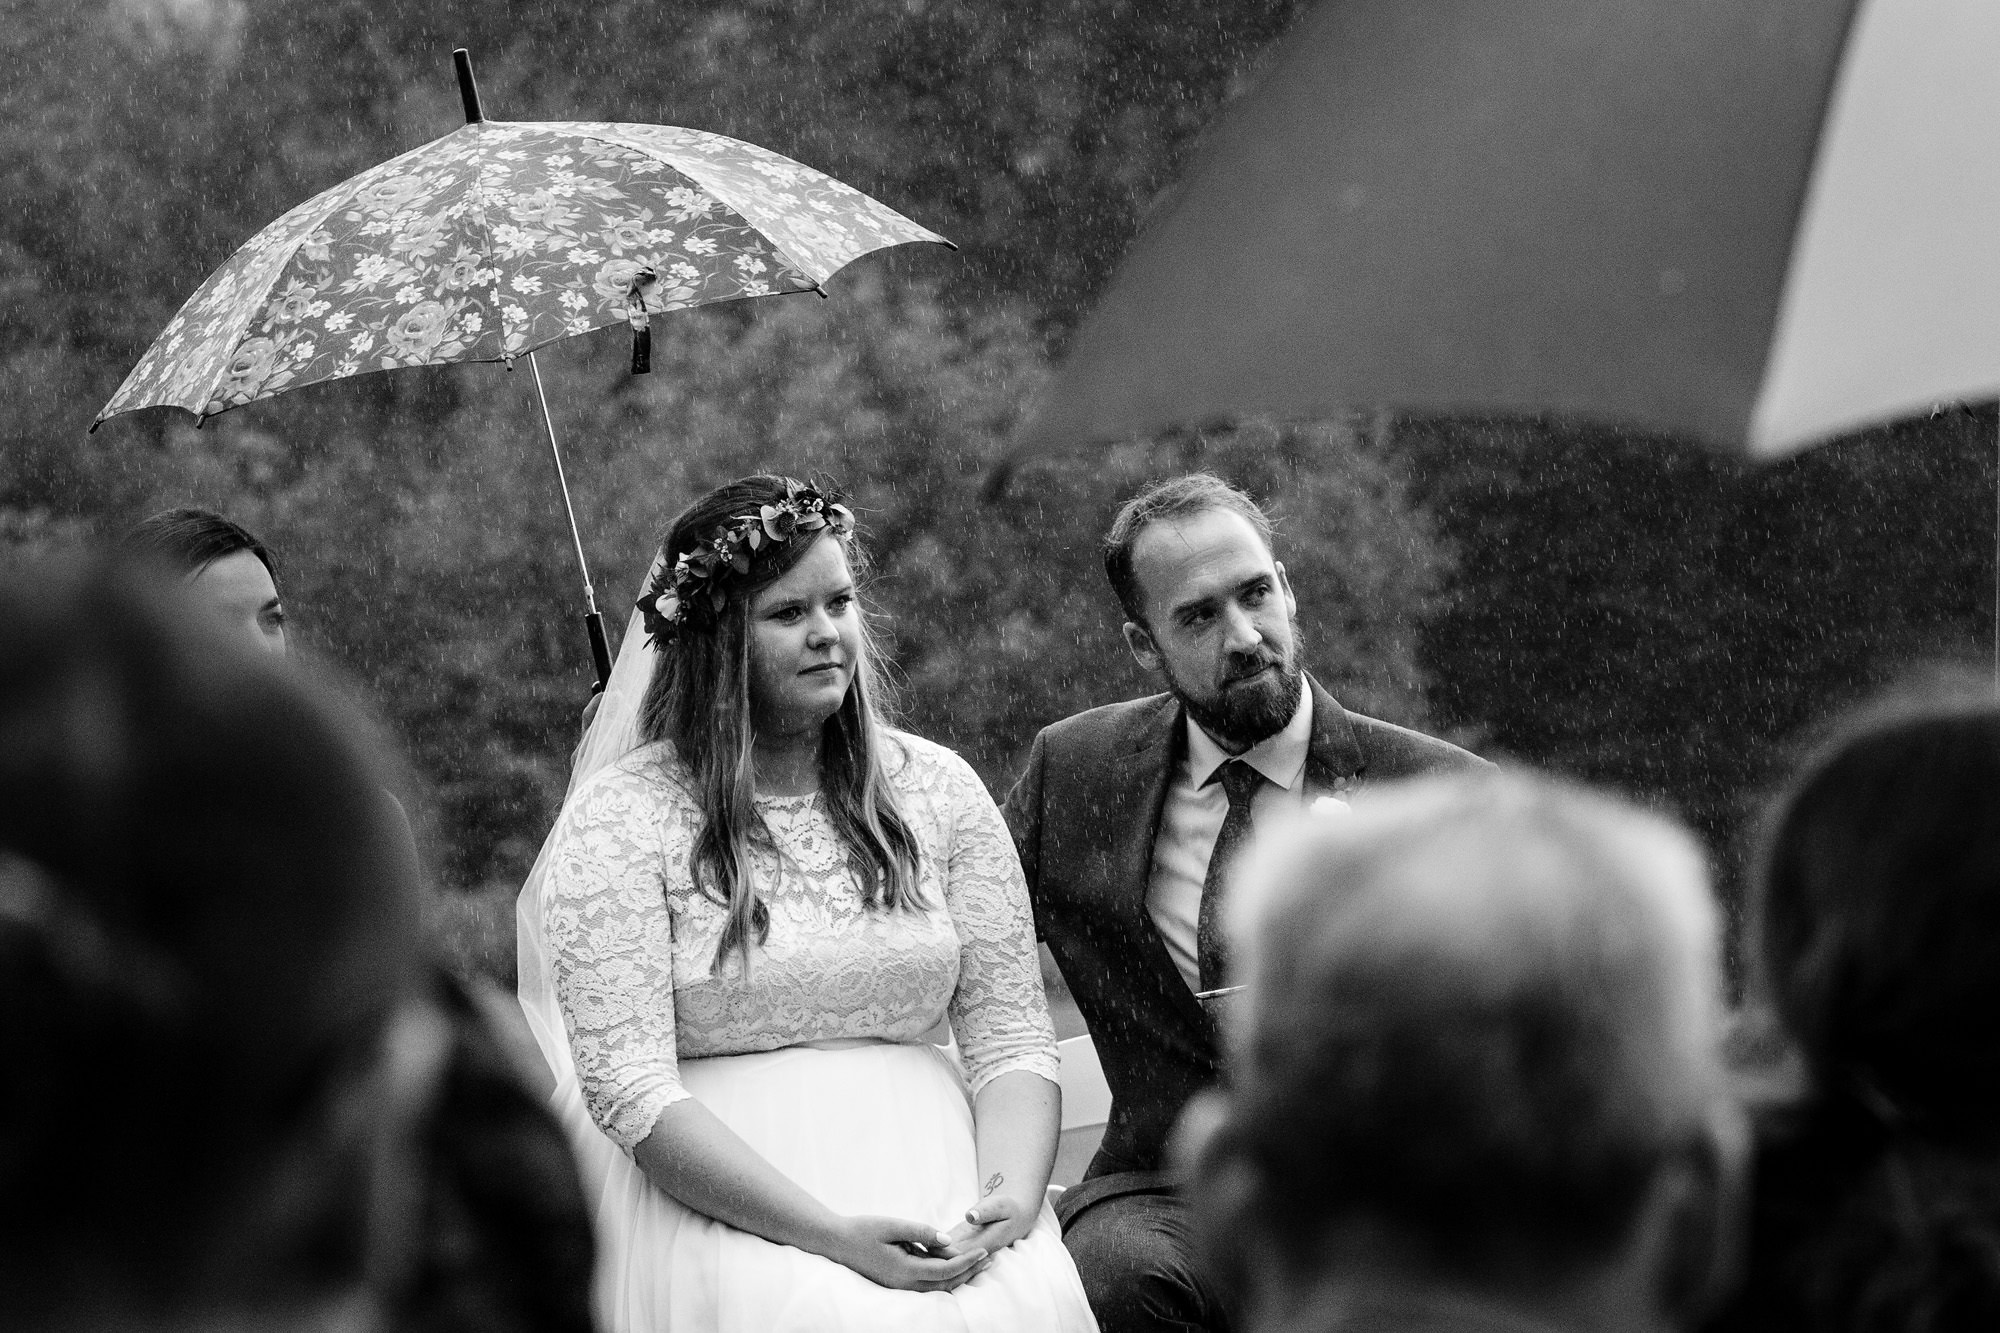 A rainy wedding ceremony at Sugarloaf Mountain in Maine